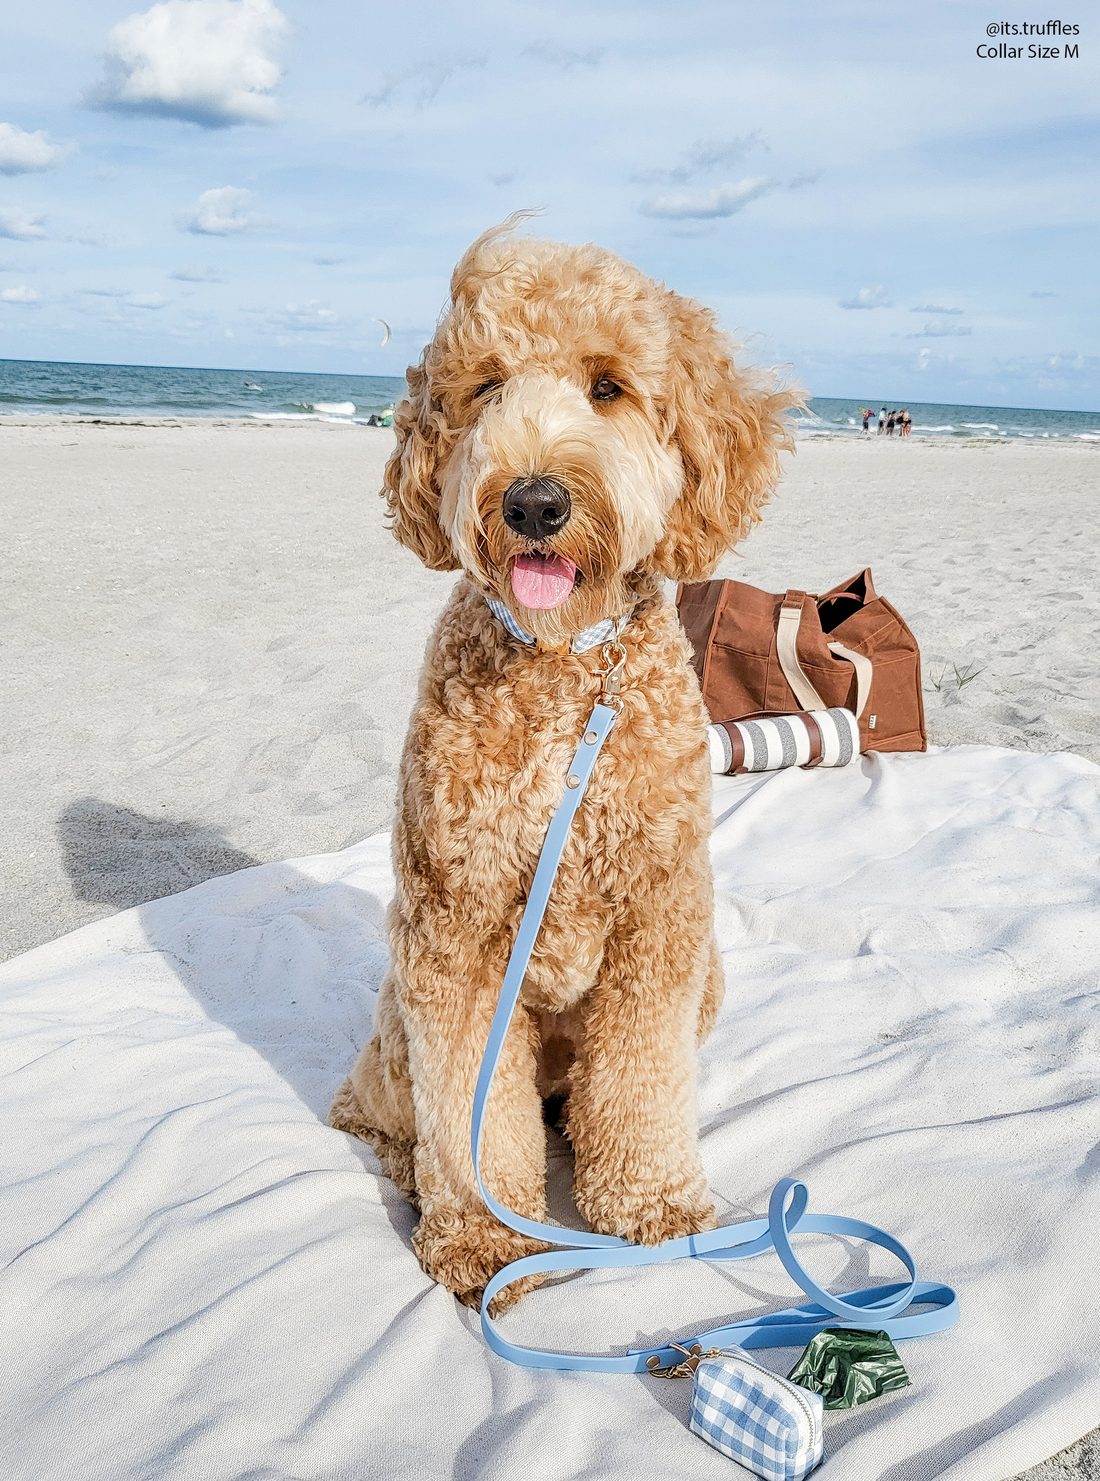 Malibu Blue Waterproof Cloud Dog Leash | Lightweight PVC Leash | Odor Proof, Stink Proof, and Durable Dog Lead | Available in 3 Lengths 